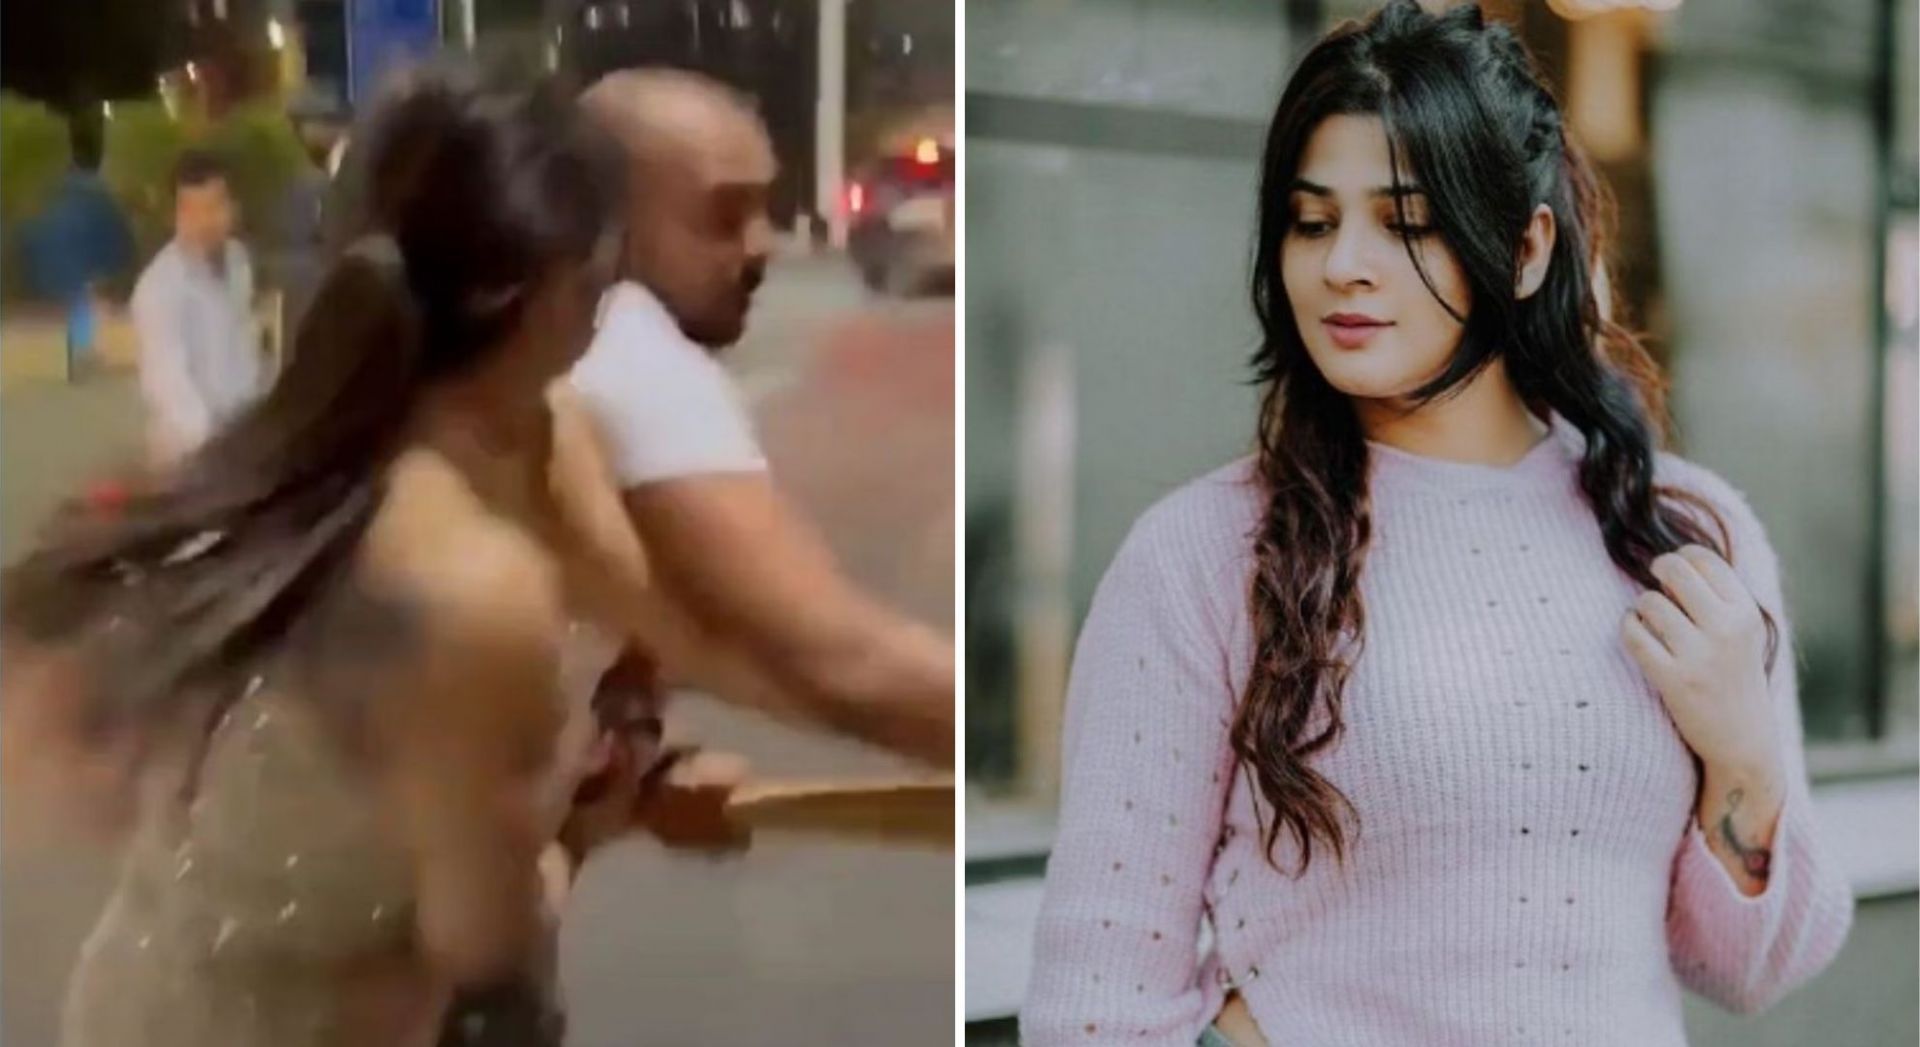 Prithvi Shaw was attacked by Sapna Gill and three other accused on Wednesday.